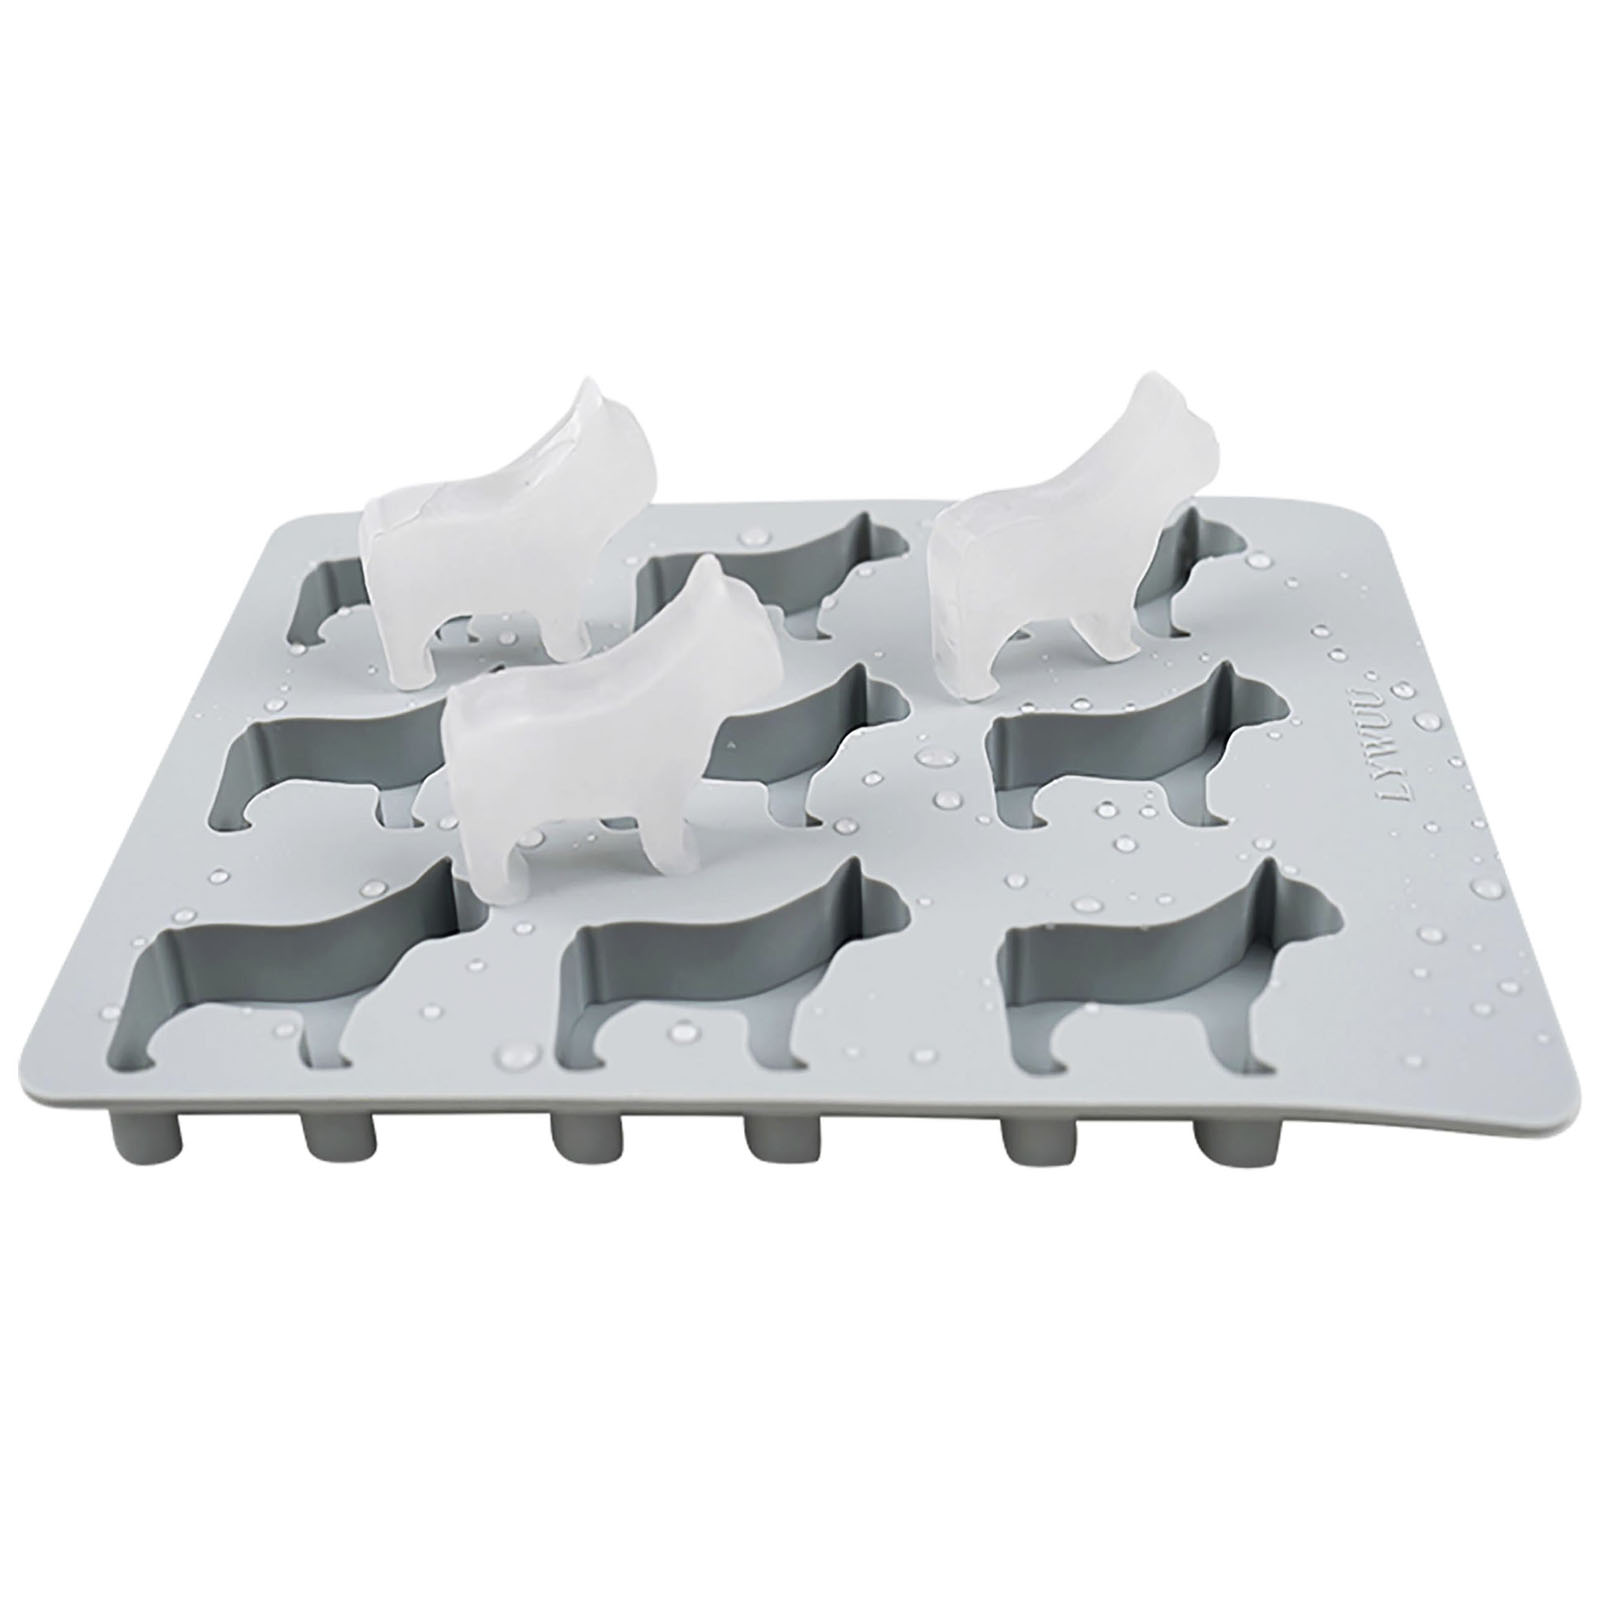  LYWUU Cat Shaped Silicone Ice Cube Molds and Tray